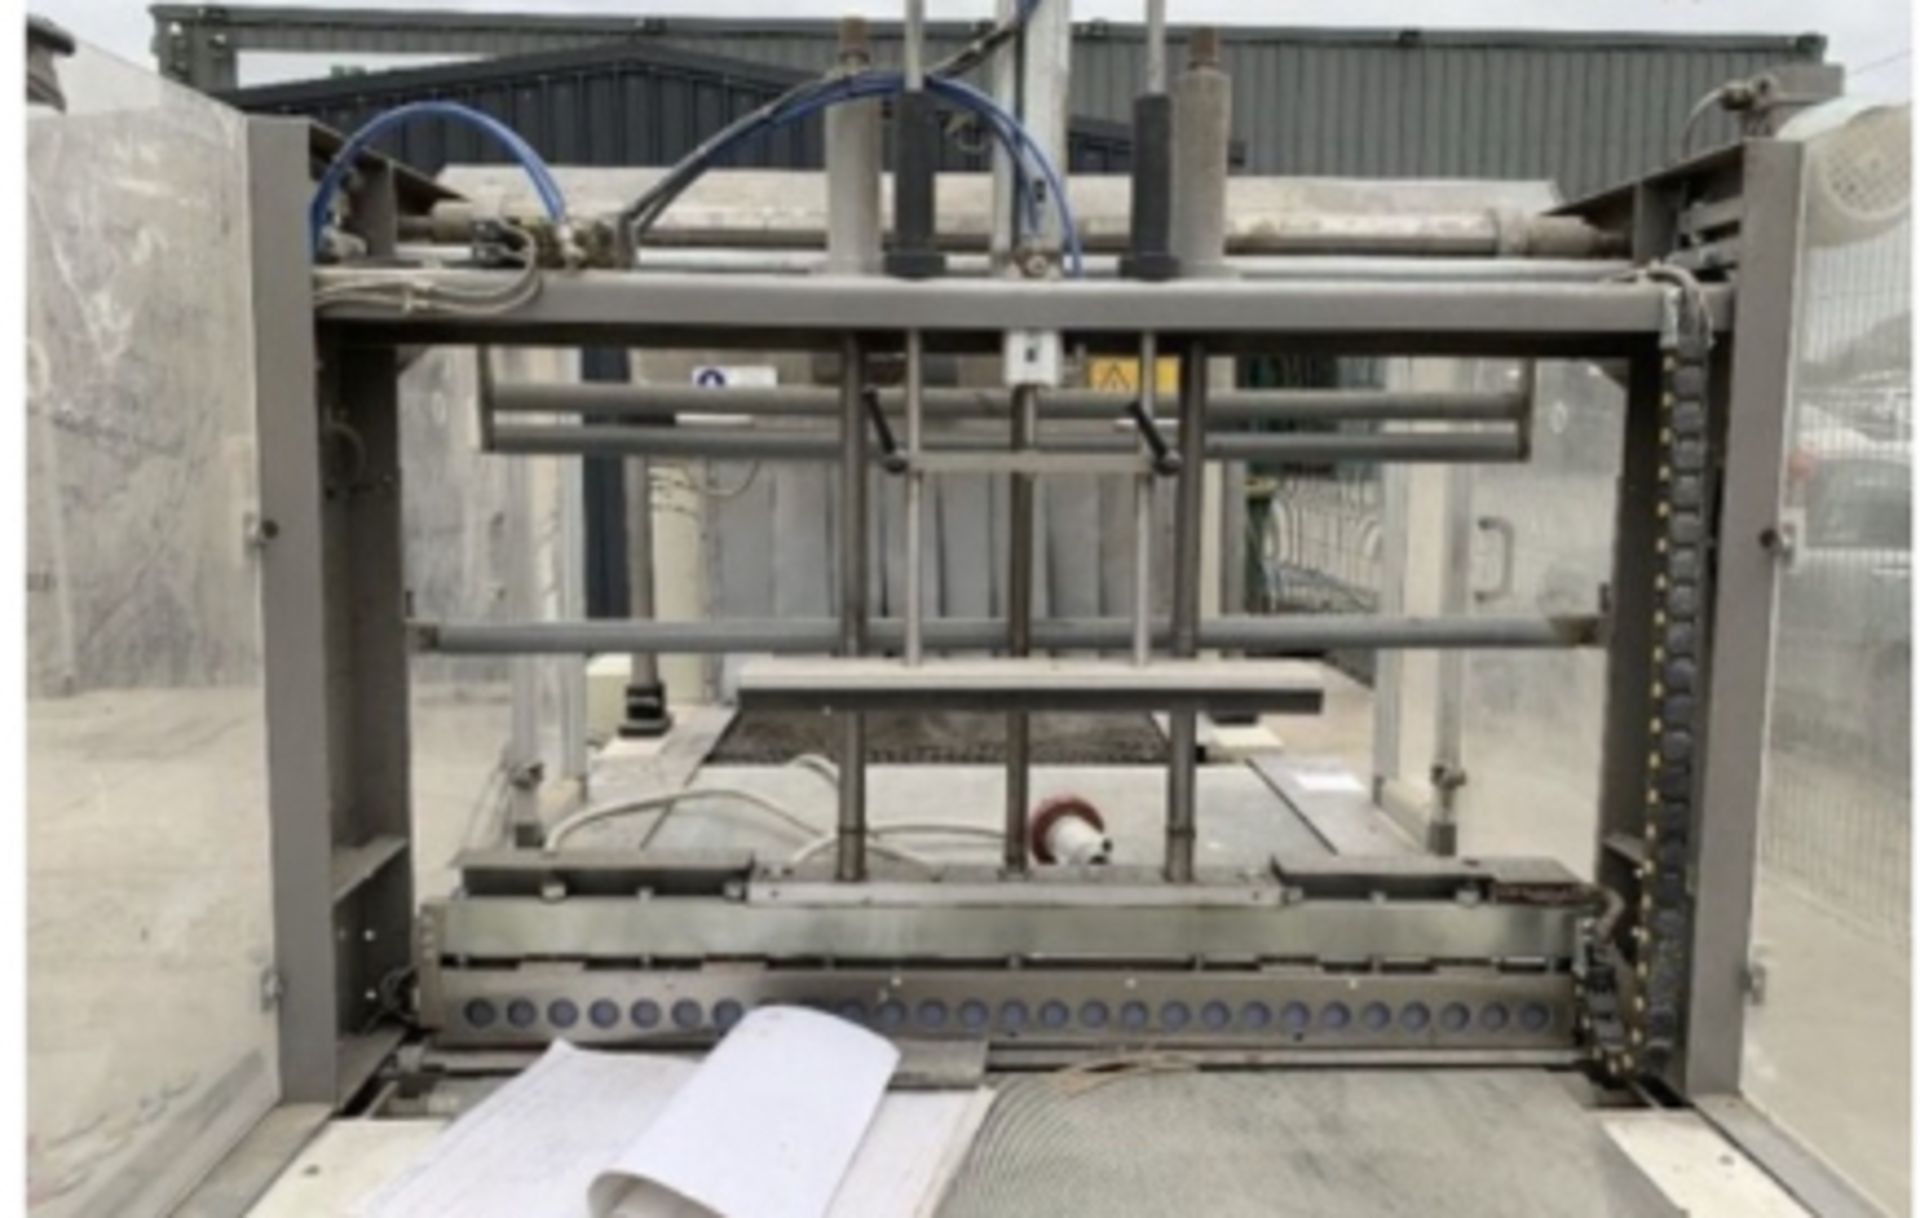 ADPAK COMPACT PSI 3 PHASE SHRINK WRAP SYSTEM.LOCATION NORTHERN IRELAND. - Image 7 of 12